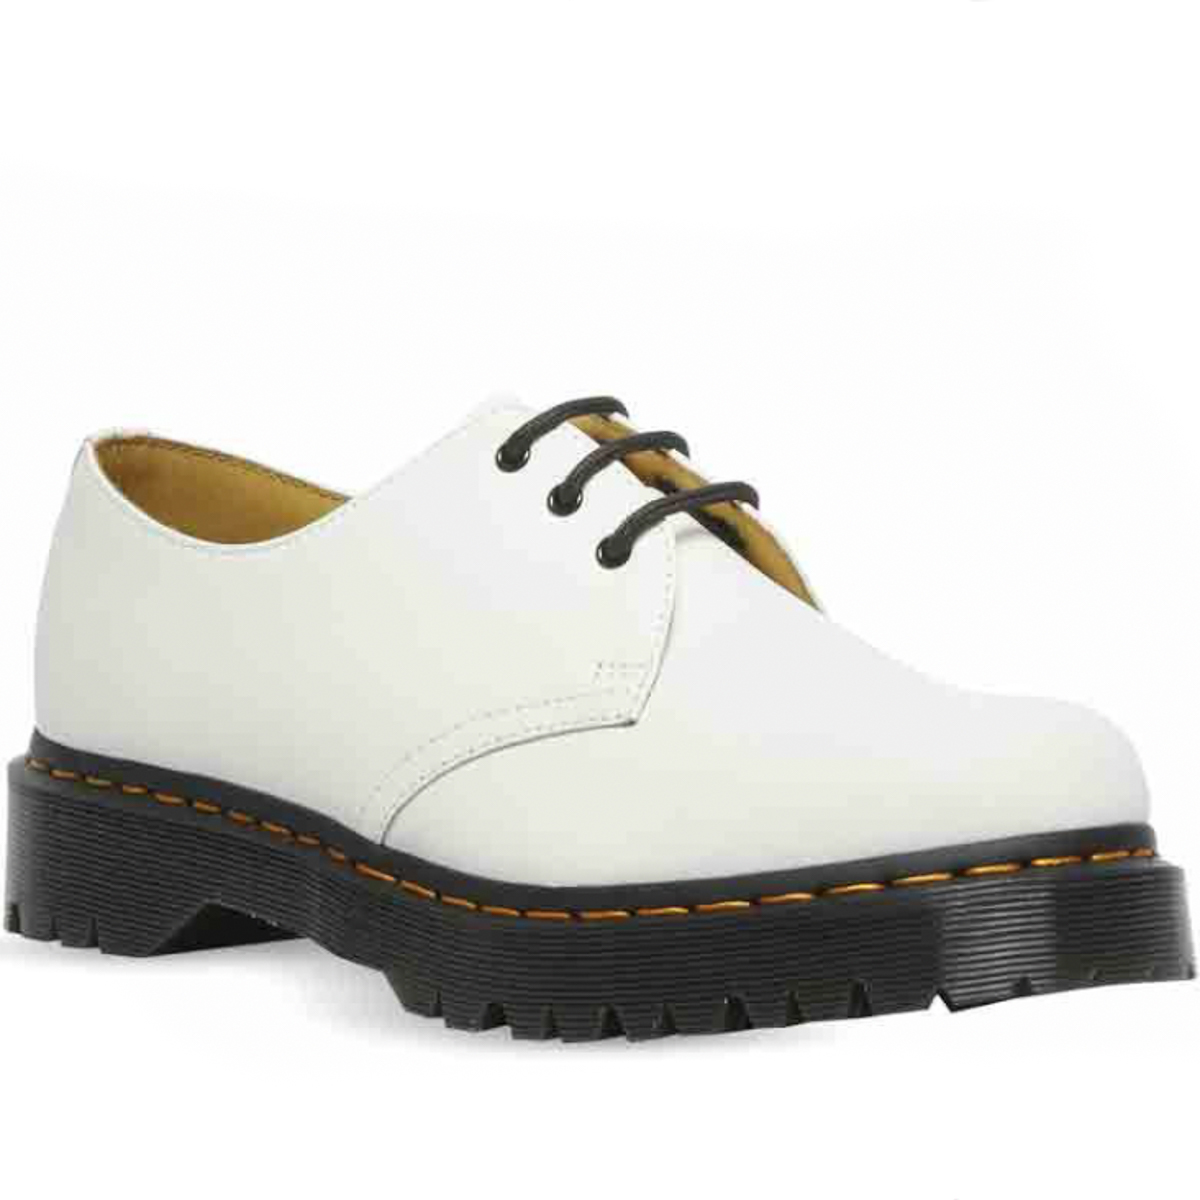 Dr Martens 1461 Bex White Smooth - Issimo Shoes